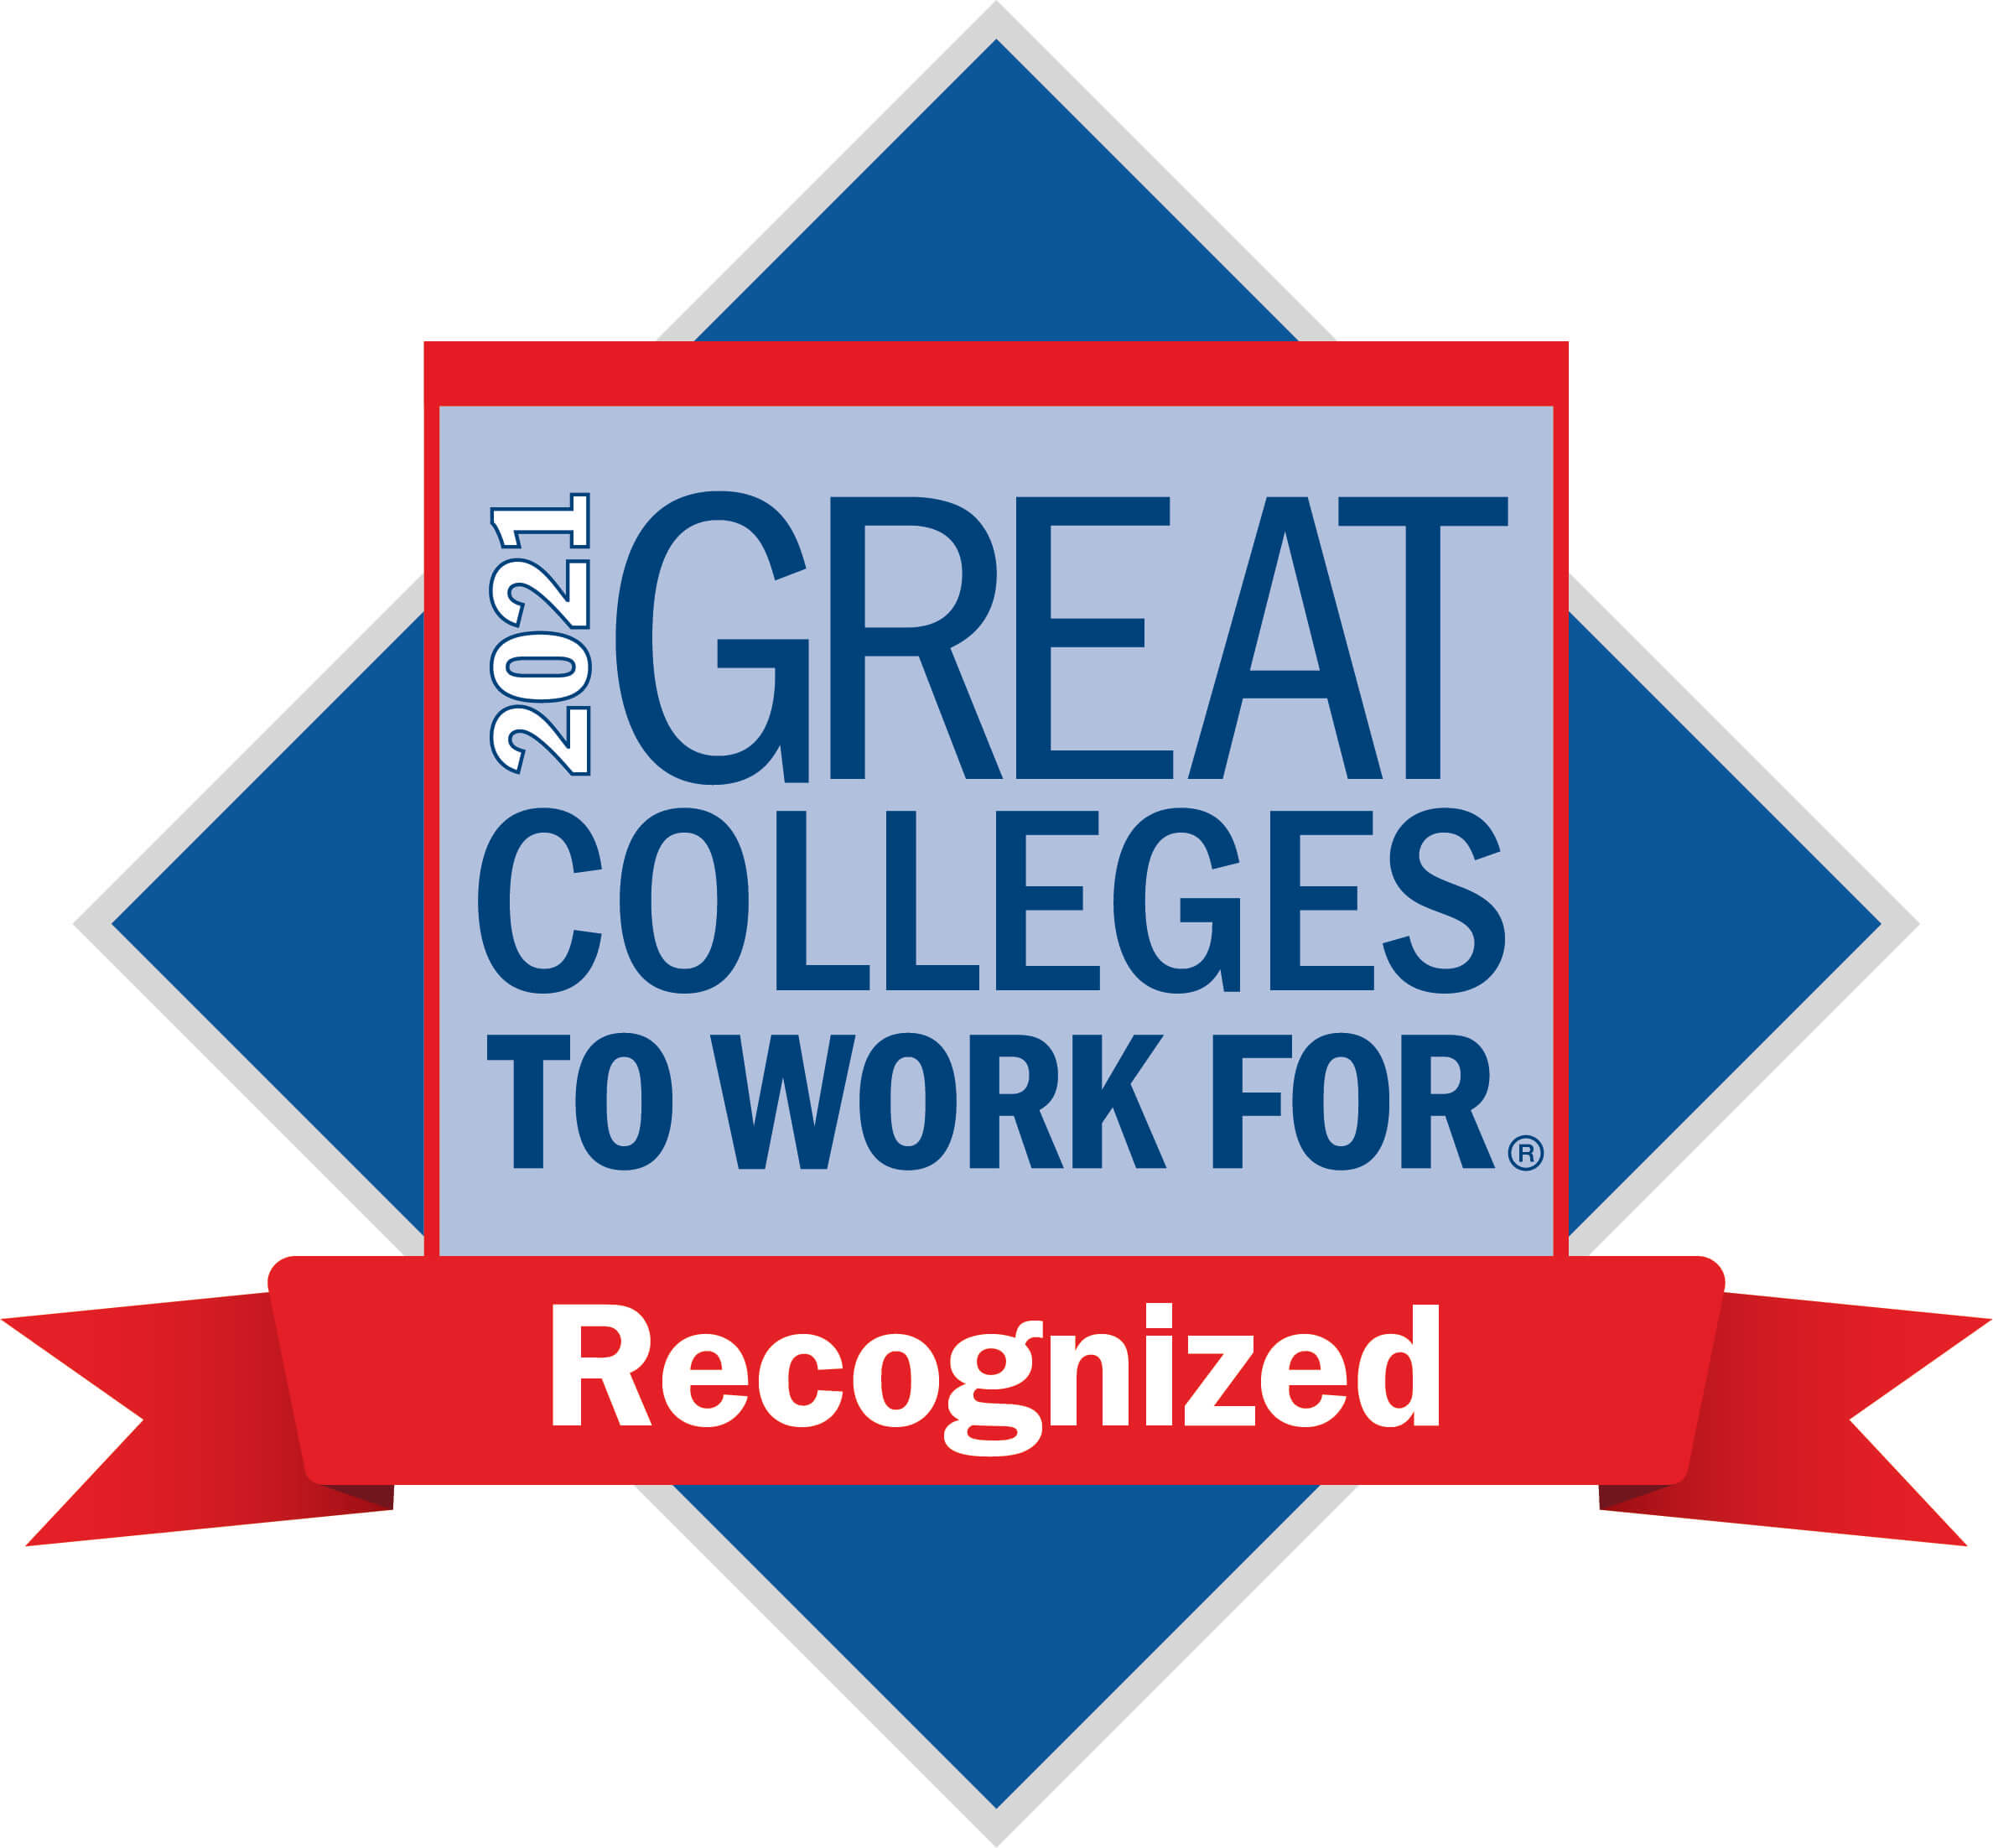 Great Colleges To Work For